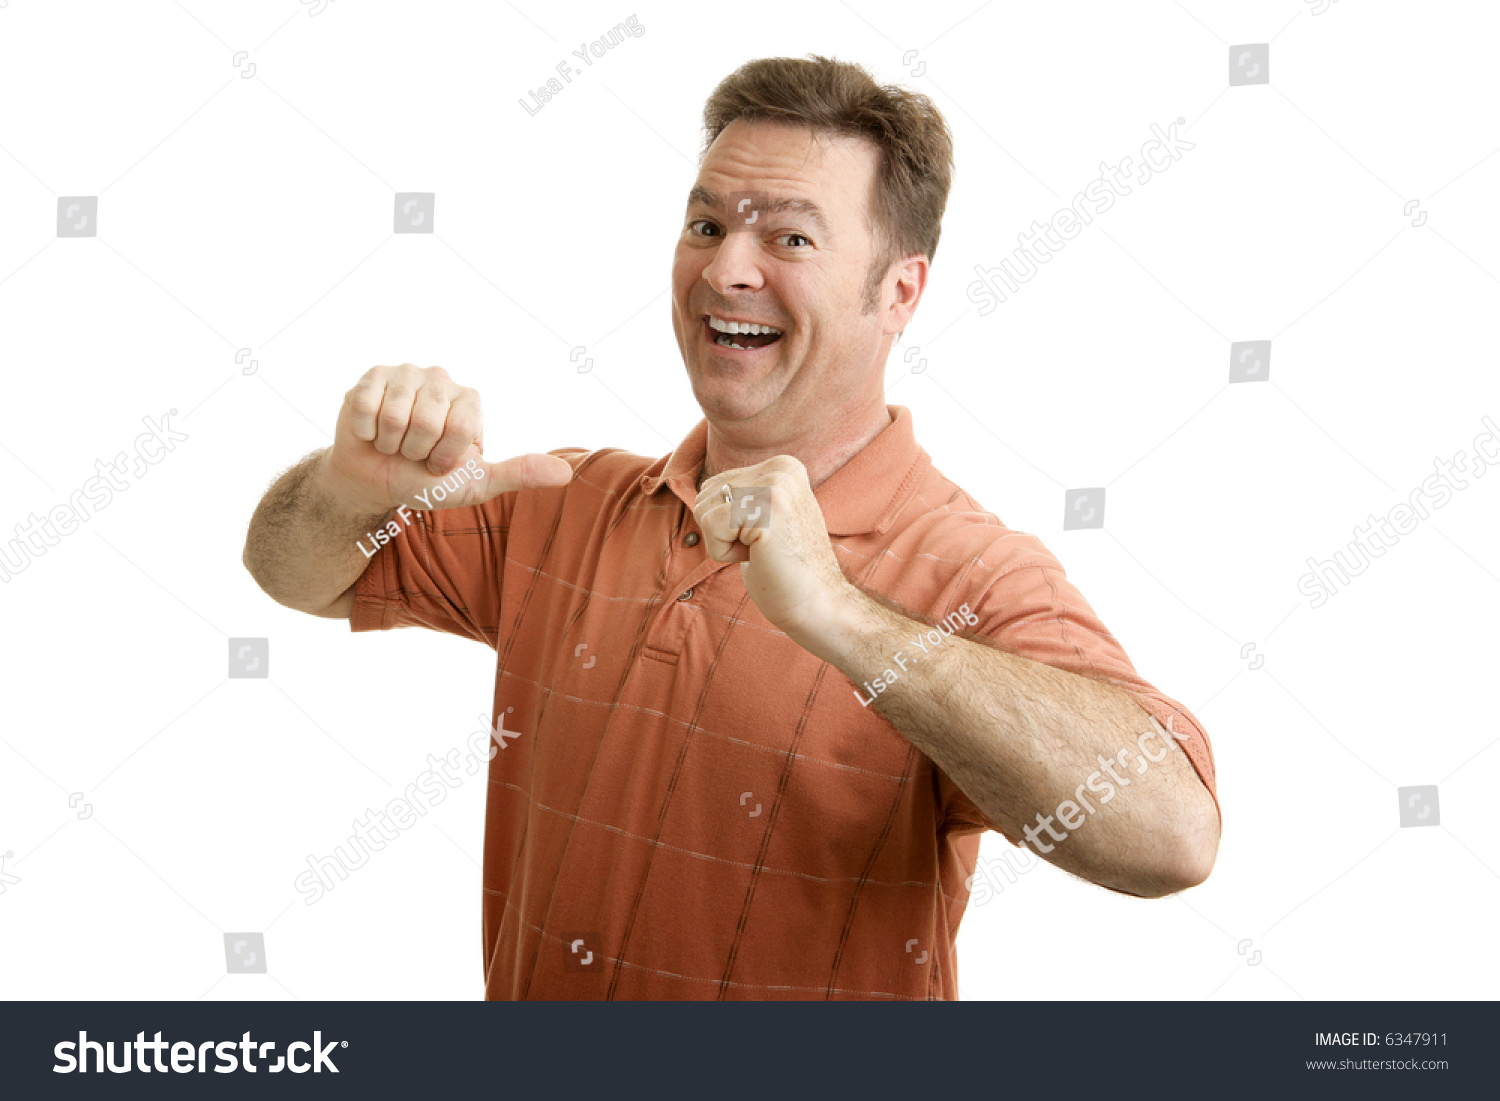 TEMA FLOOD Stock-photo-average-guy-feeling-proud-and-excited-pointing-to-himself-with-both-thumbs-isolated-on-white-6347911